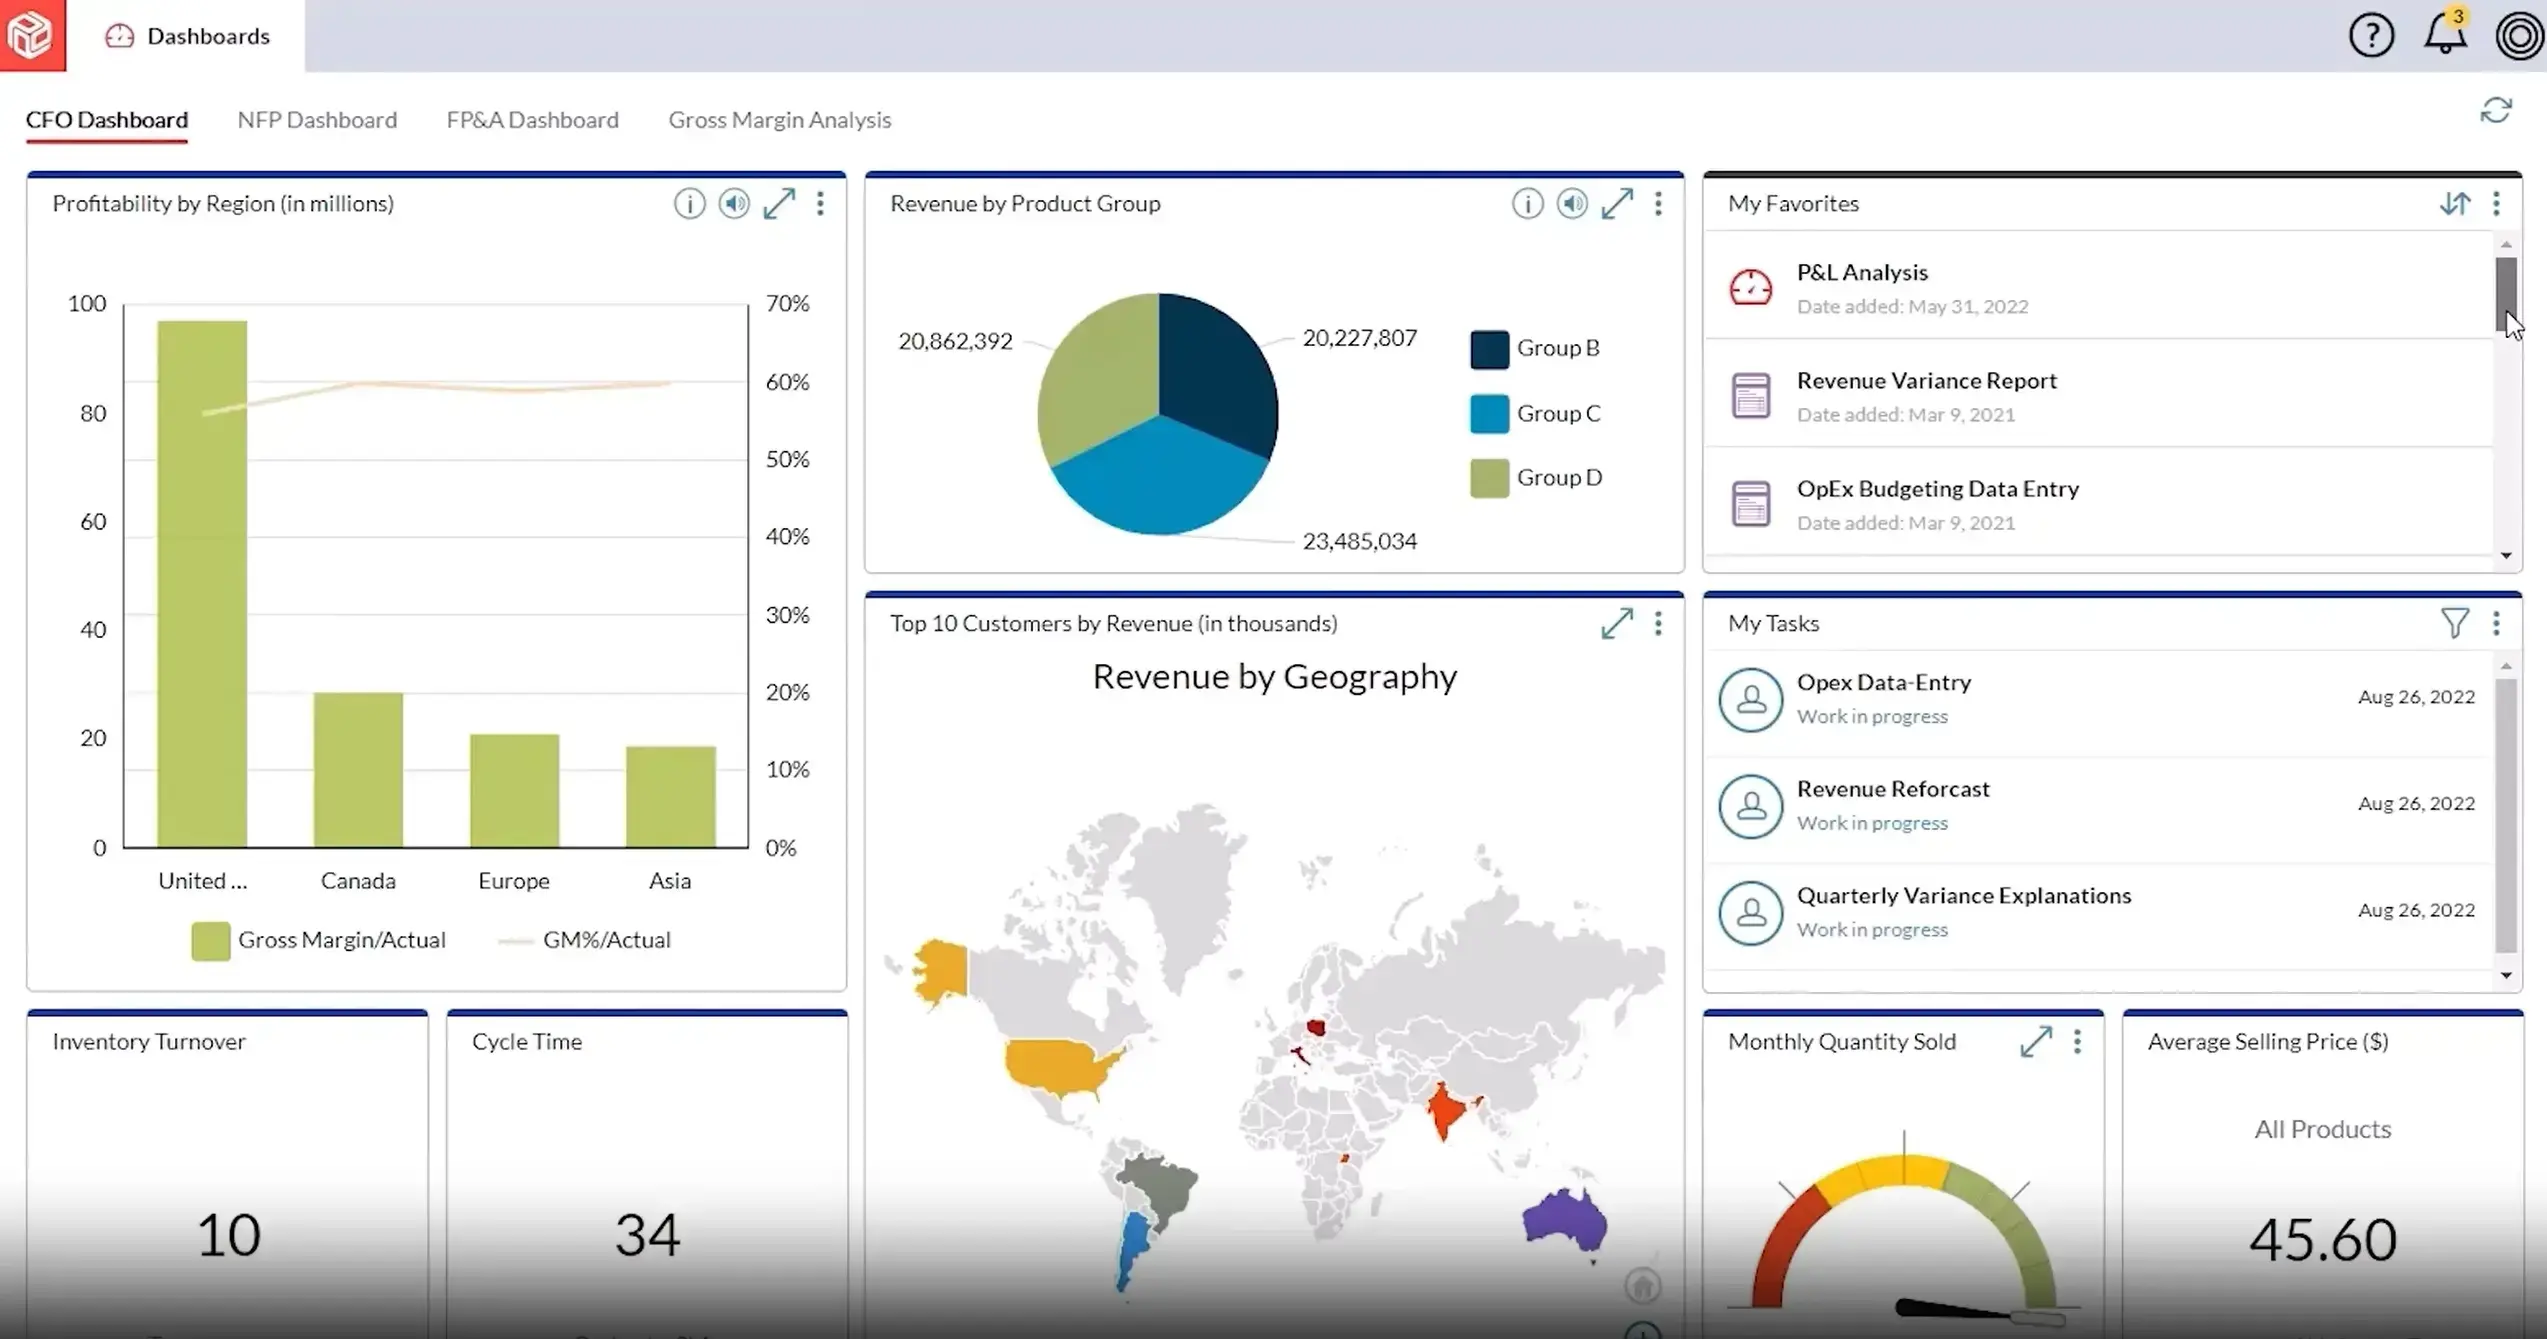 CFO dashboard, several graphs including bar chart, pie chart, geography map, and gauge chart